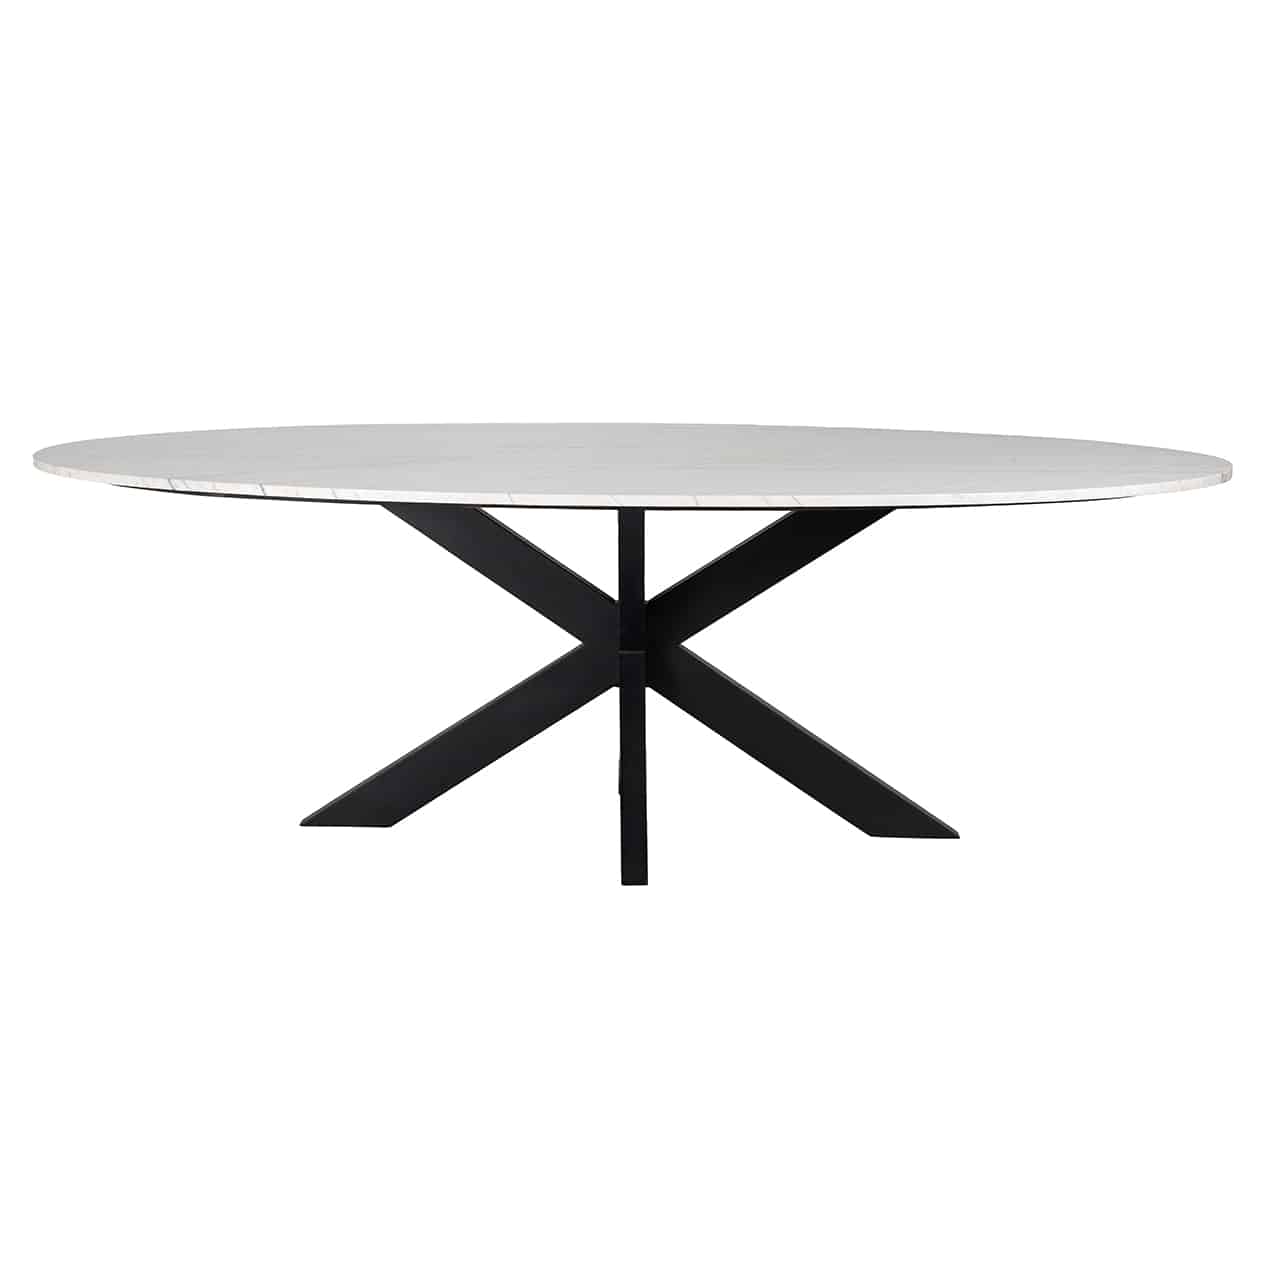 Lexi White Marble 2.3m Dining Table